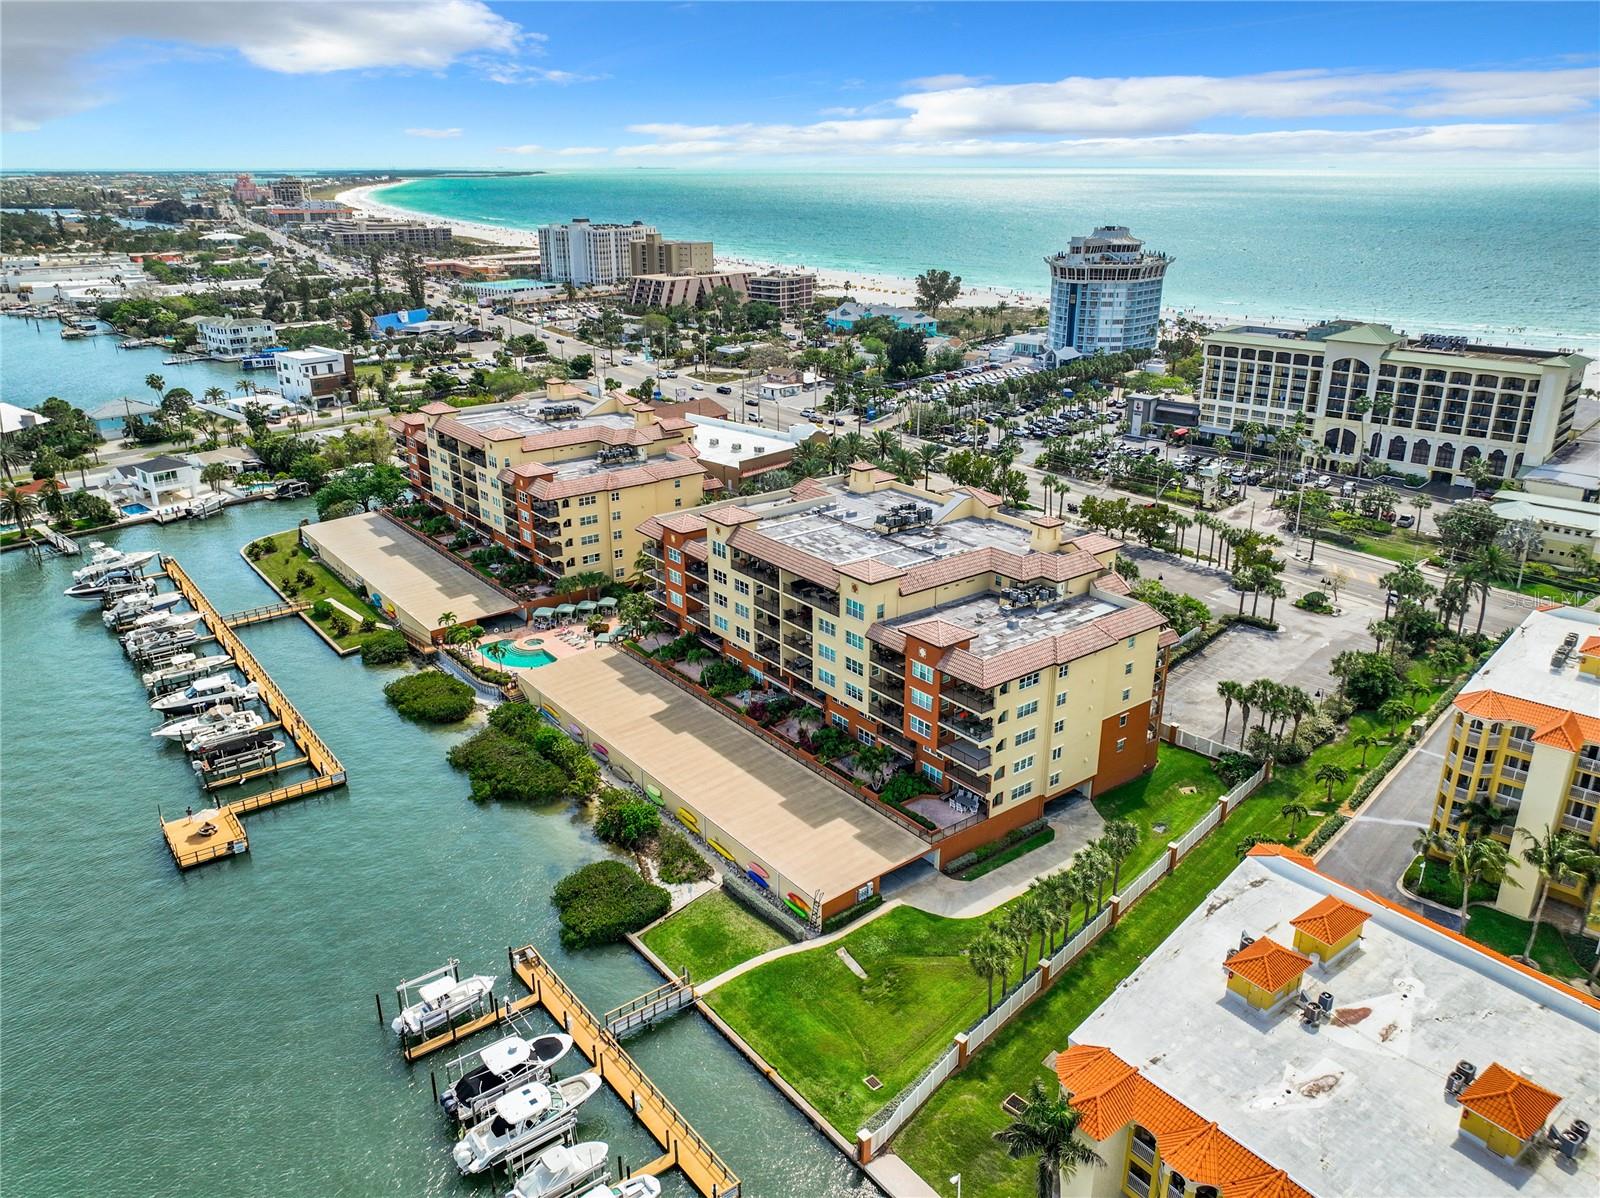 This aerial view depicts the nice location of the community.  There is green space for walking dogs and just enjoying yourself besides having 2 sets of boat slips and the fishing pier.